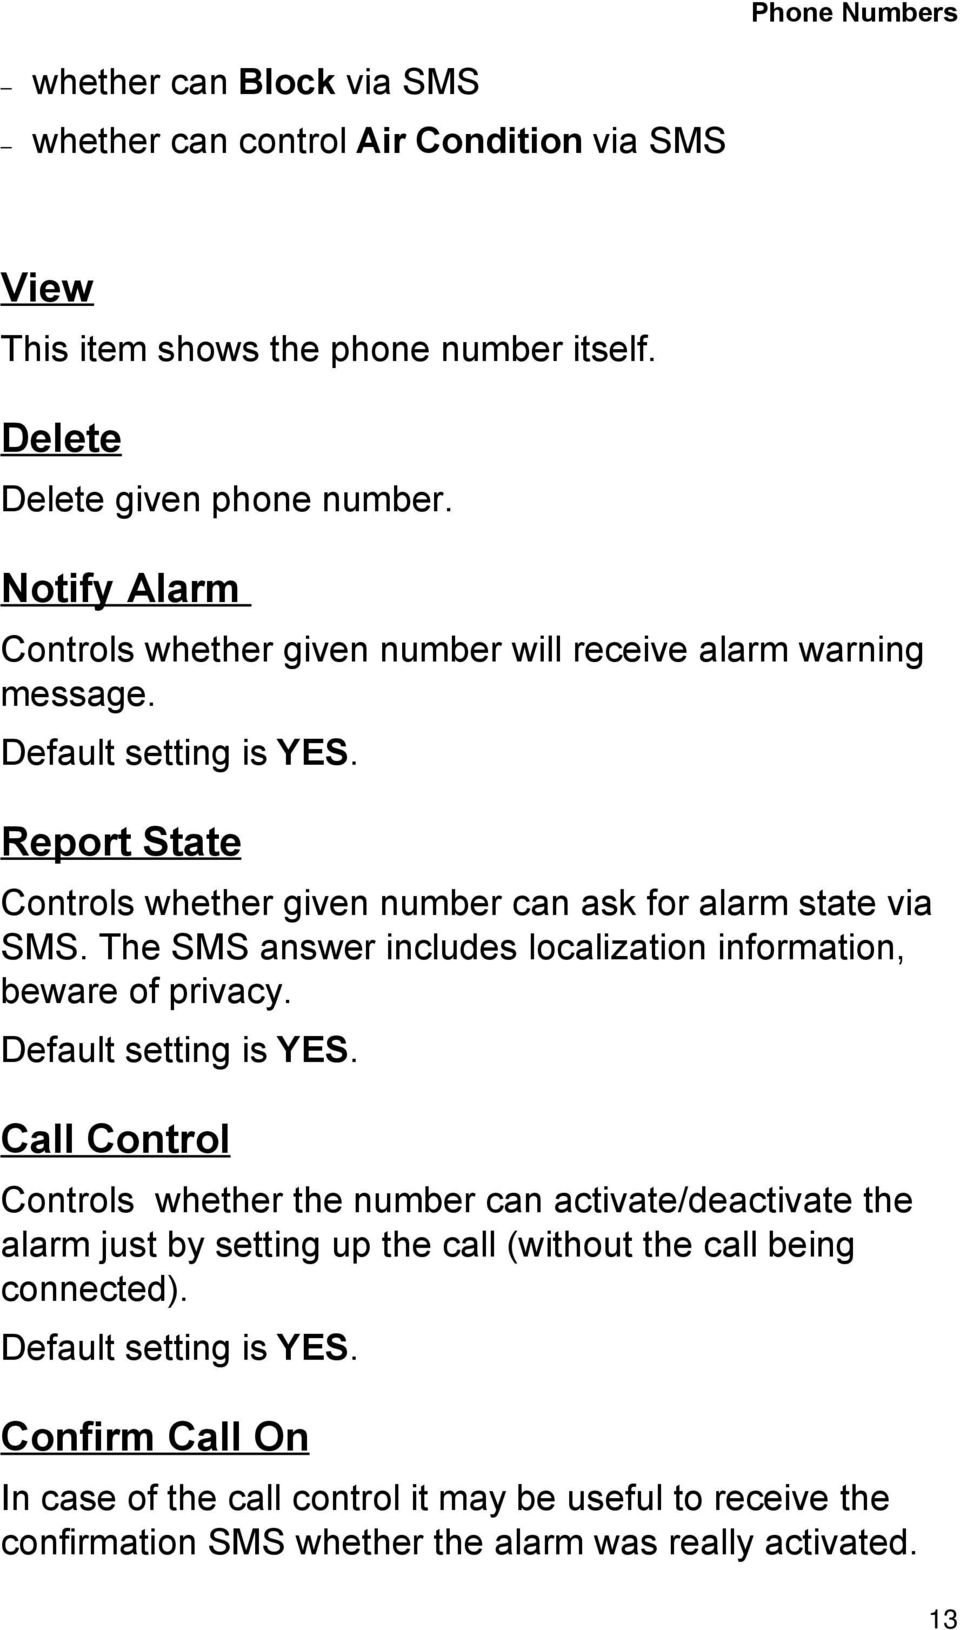 The SMS answer includes localization information, beware of privacy. Default setting is YES.